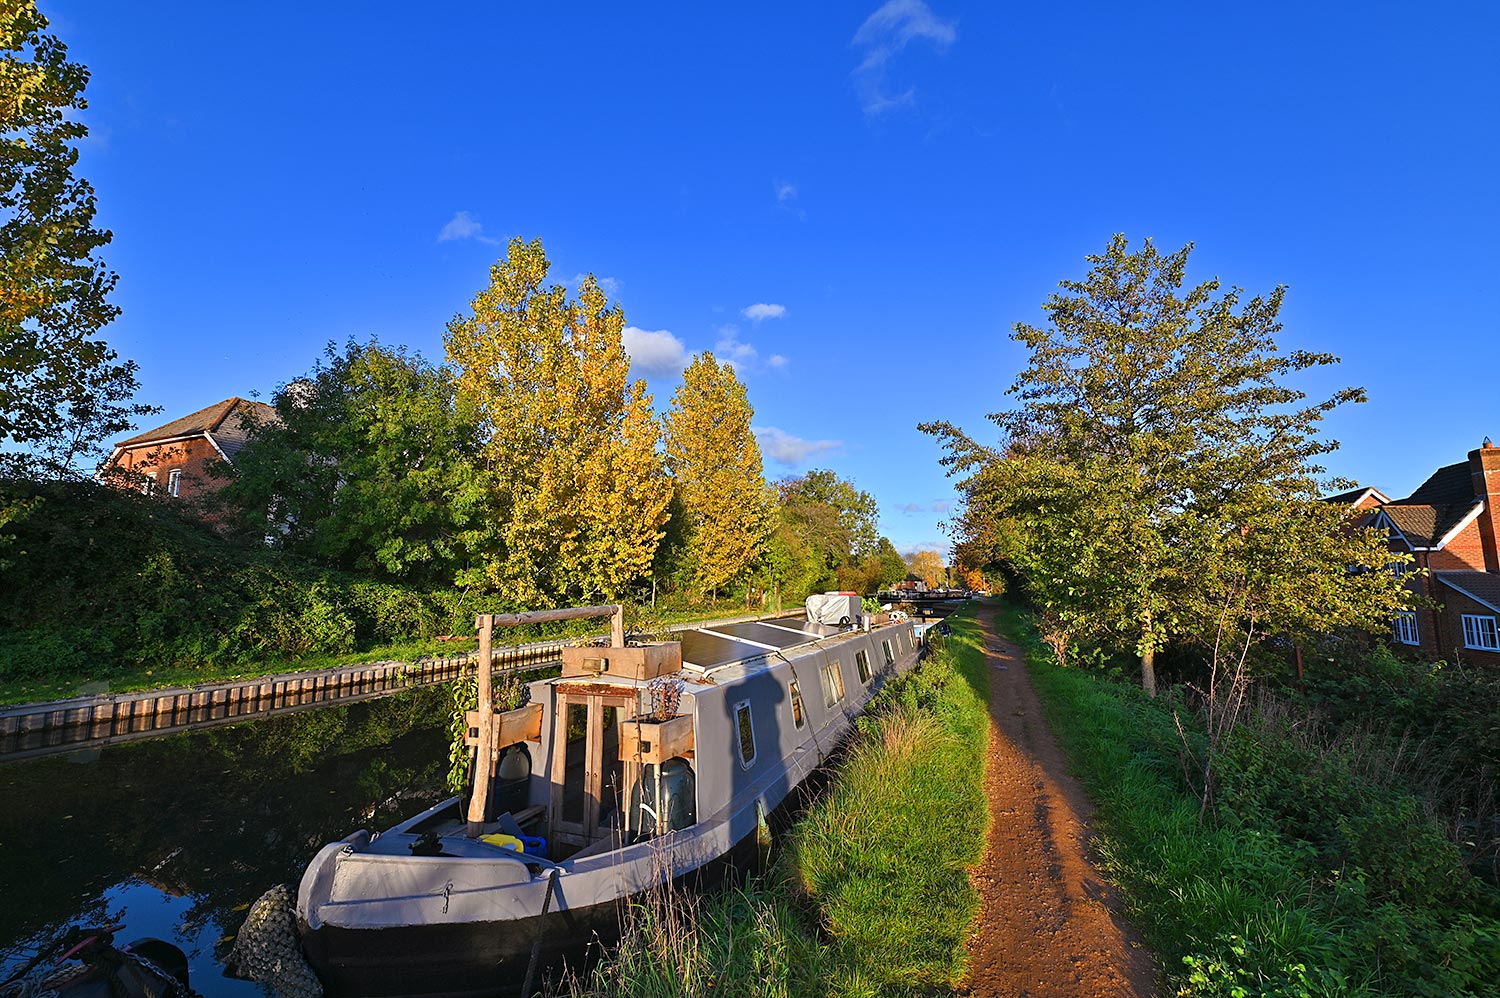 Picture of a canal boat moored along a canal in the autumn sunshine, trees in their autumn colour in the background